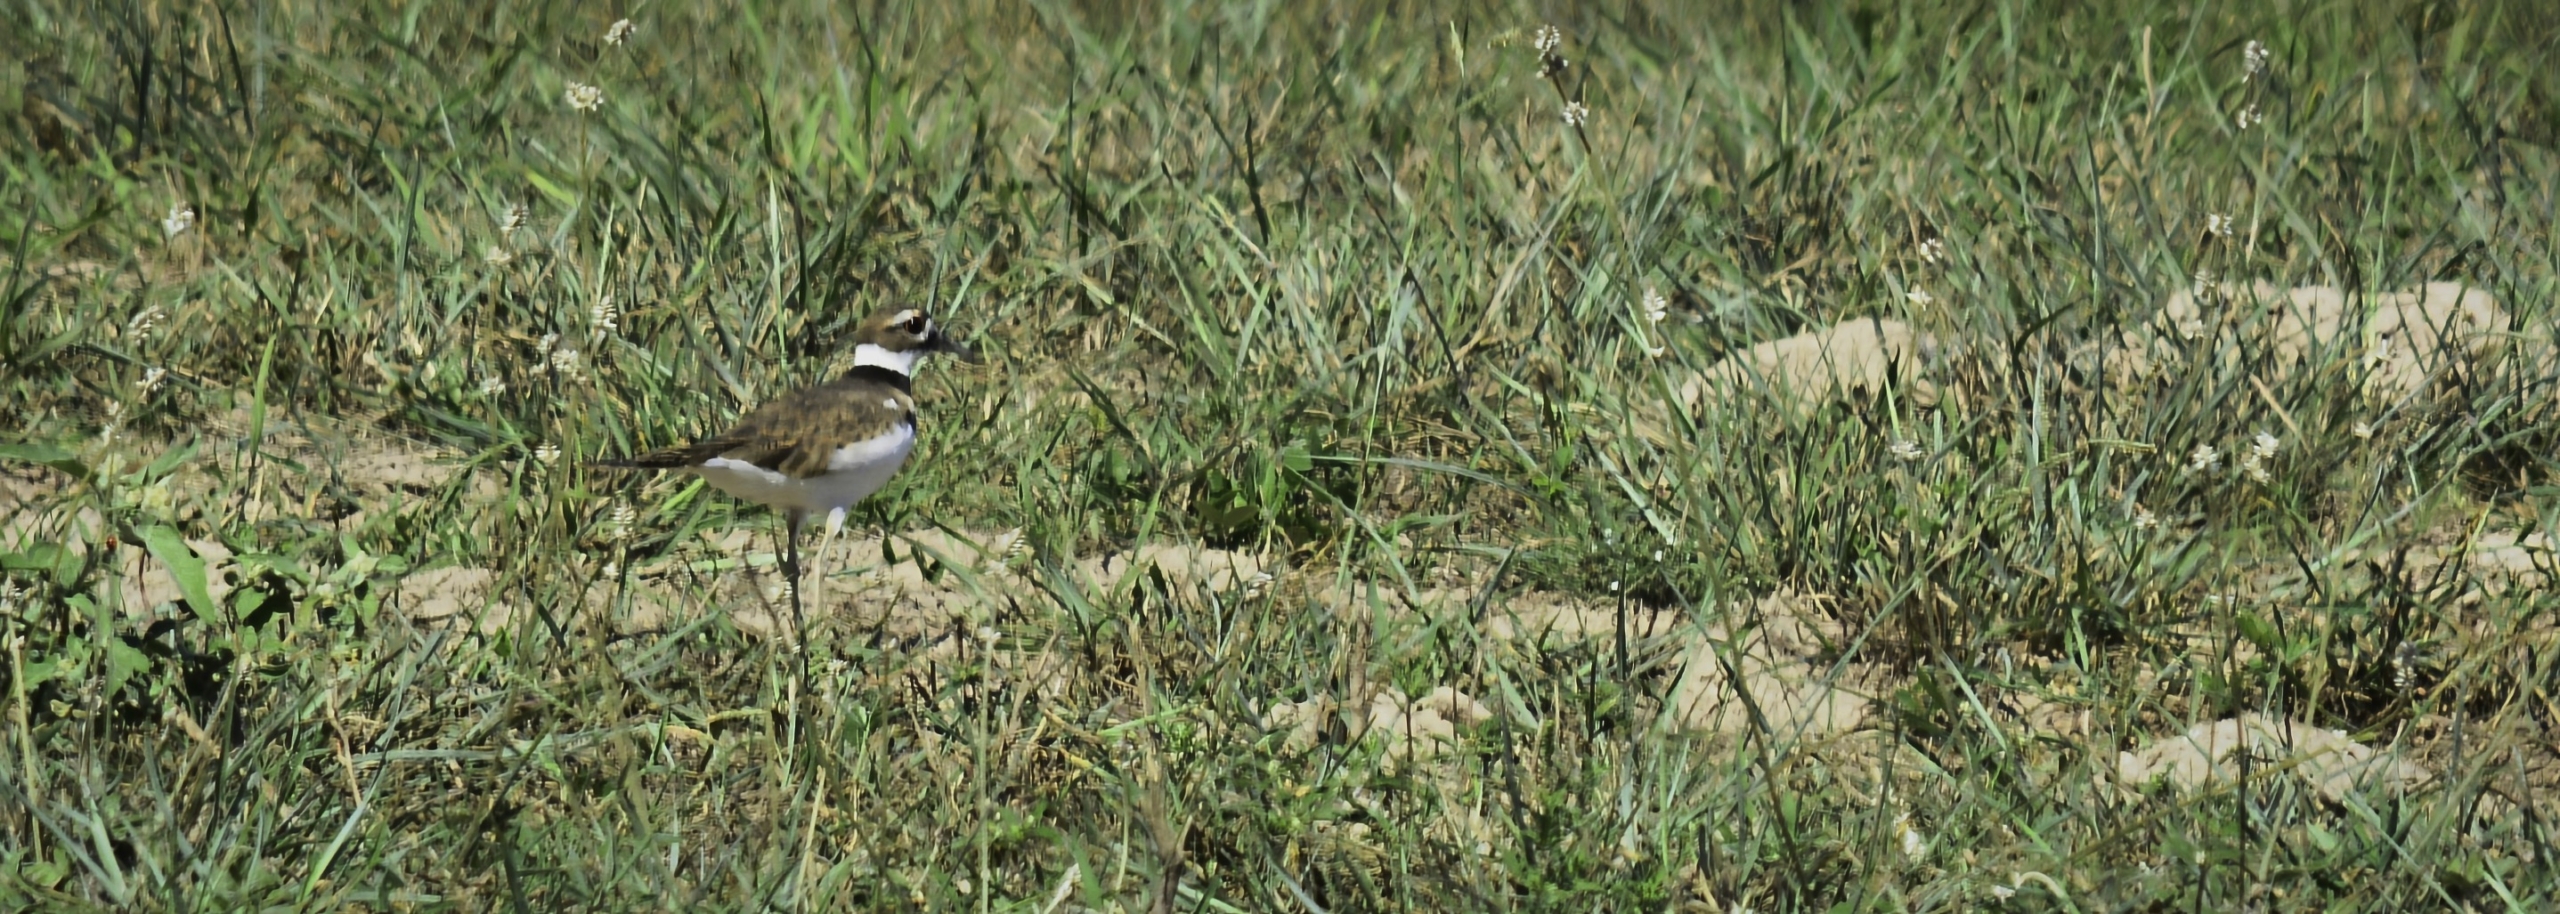 A single Killdeer bird stand in the grassy plain with a bit of sandy soil within the grass